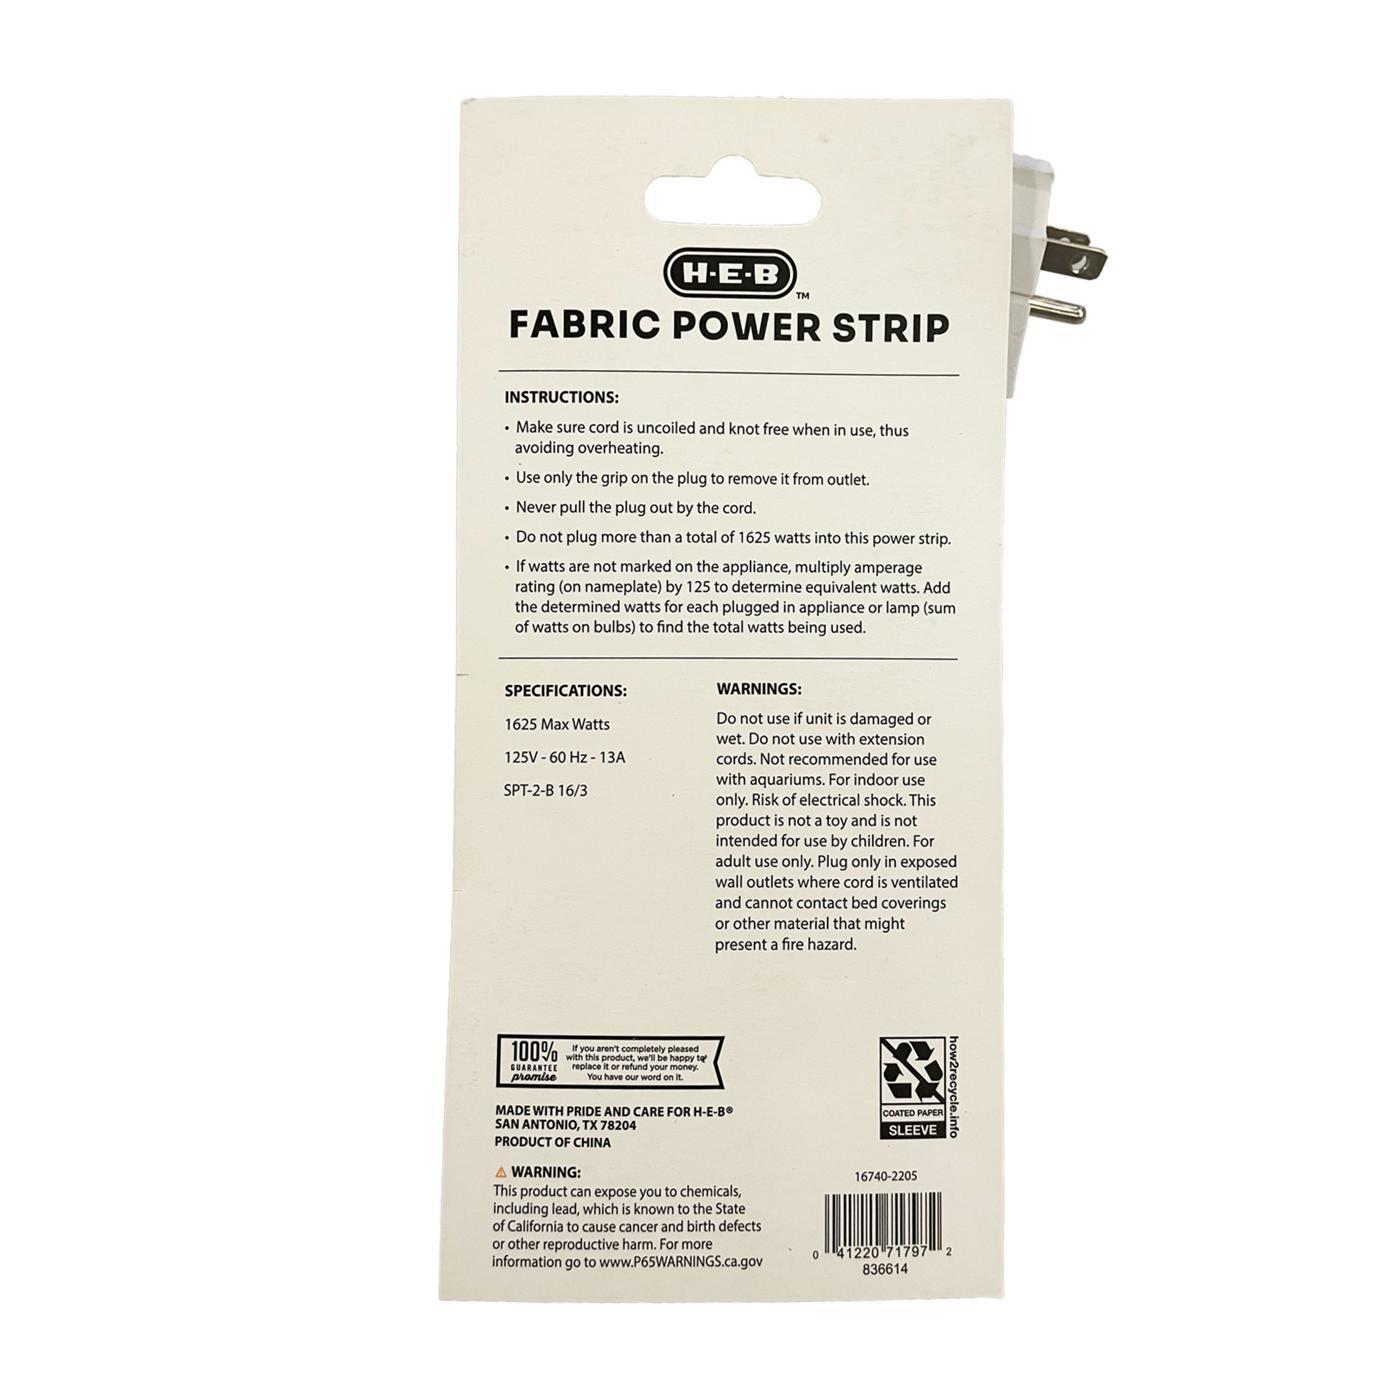 H-E-B 3-Outlet Indoor Fabric Power Strip - White; image 2 of 2